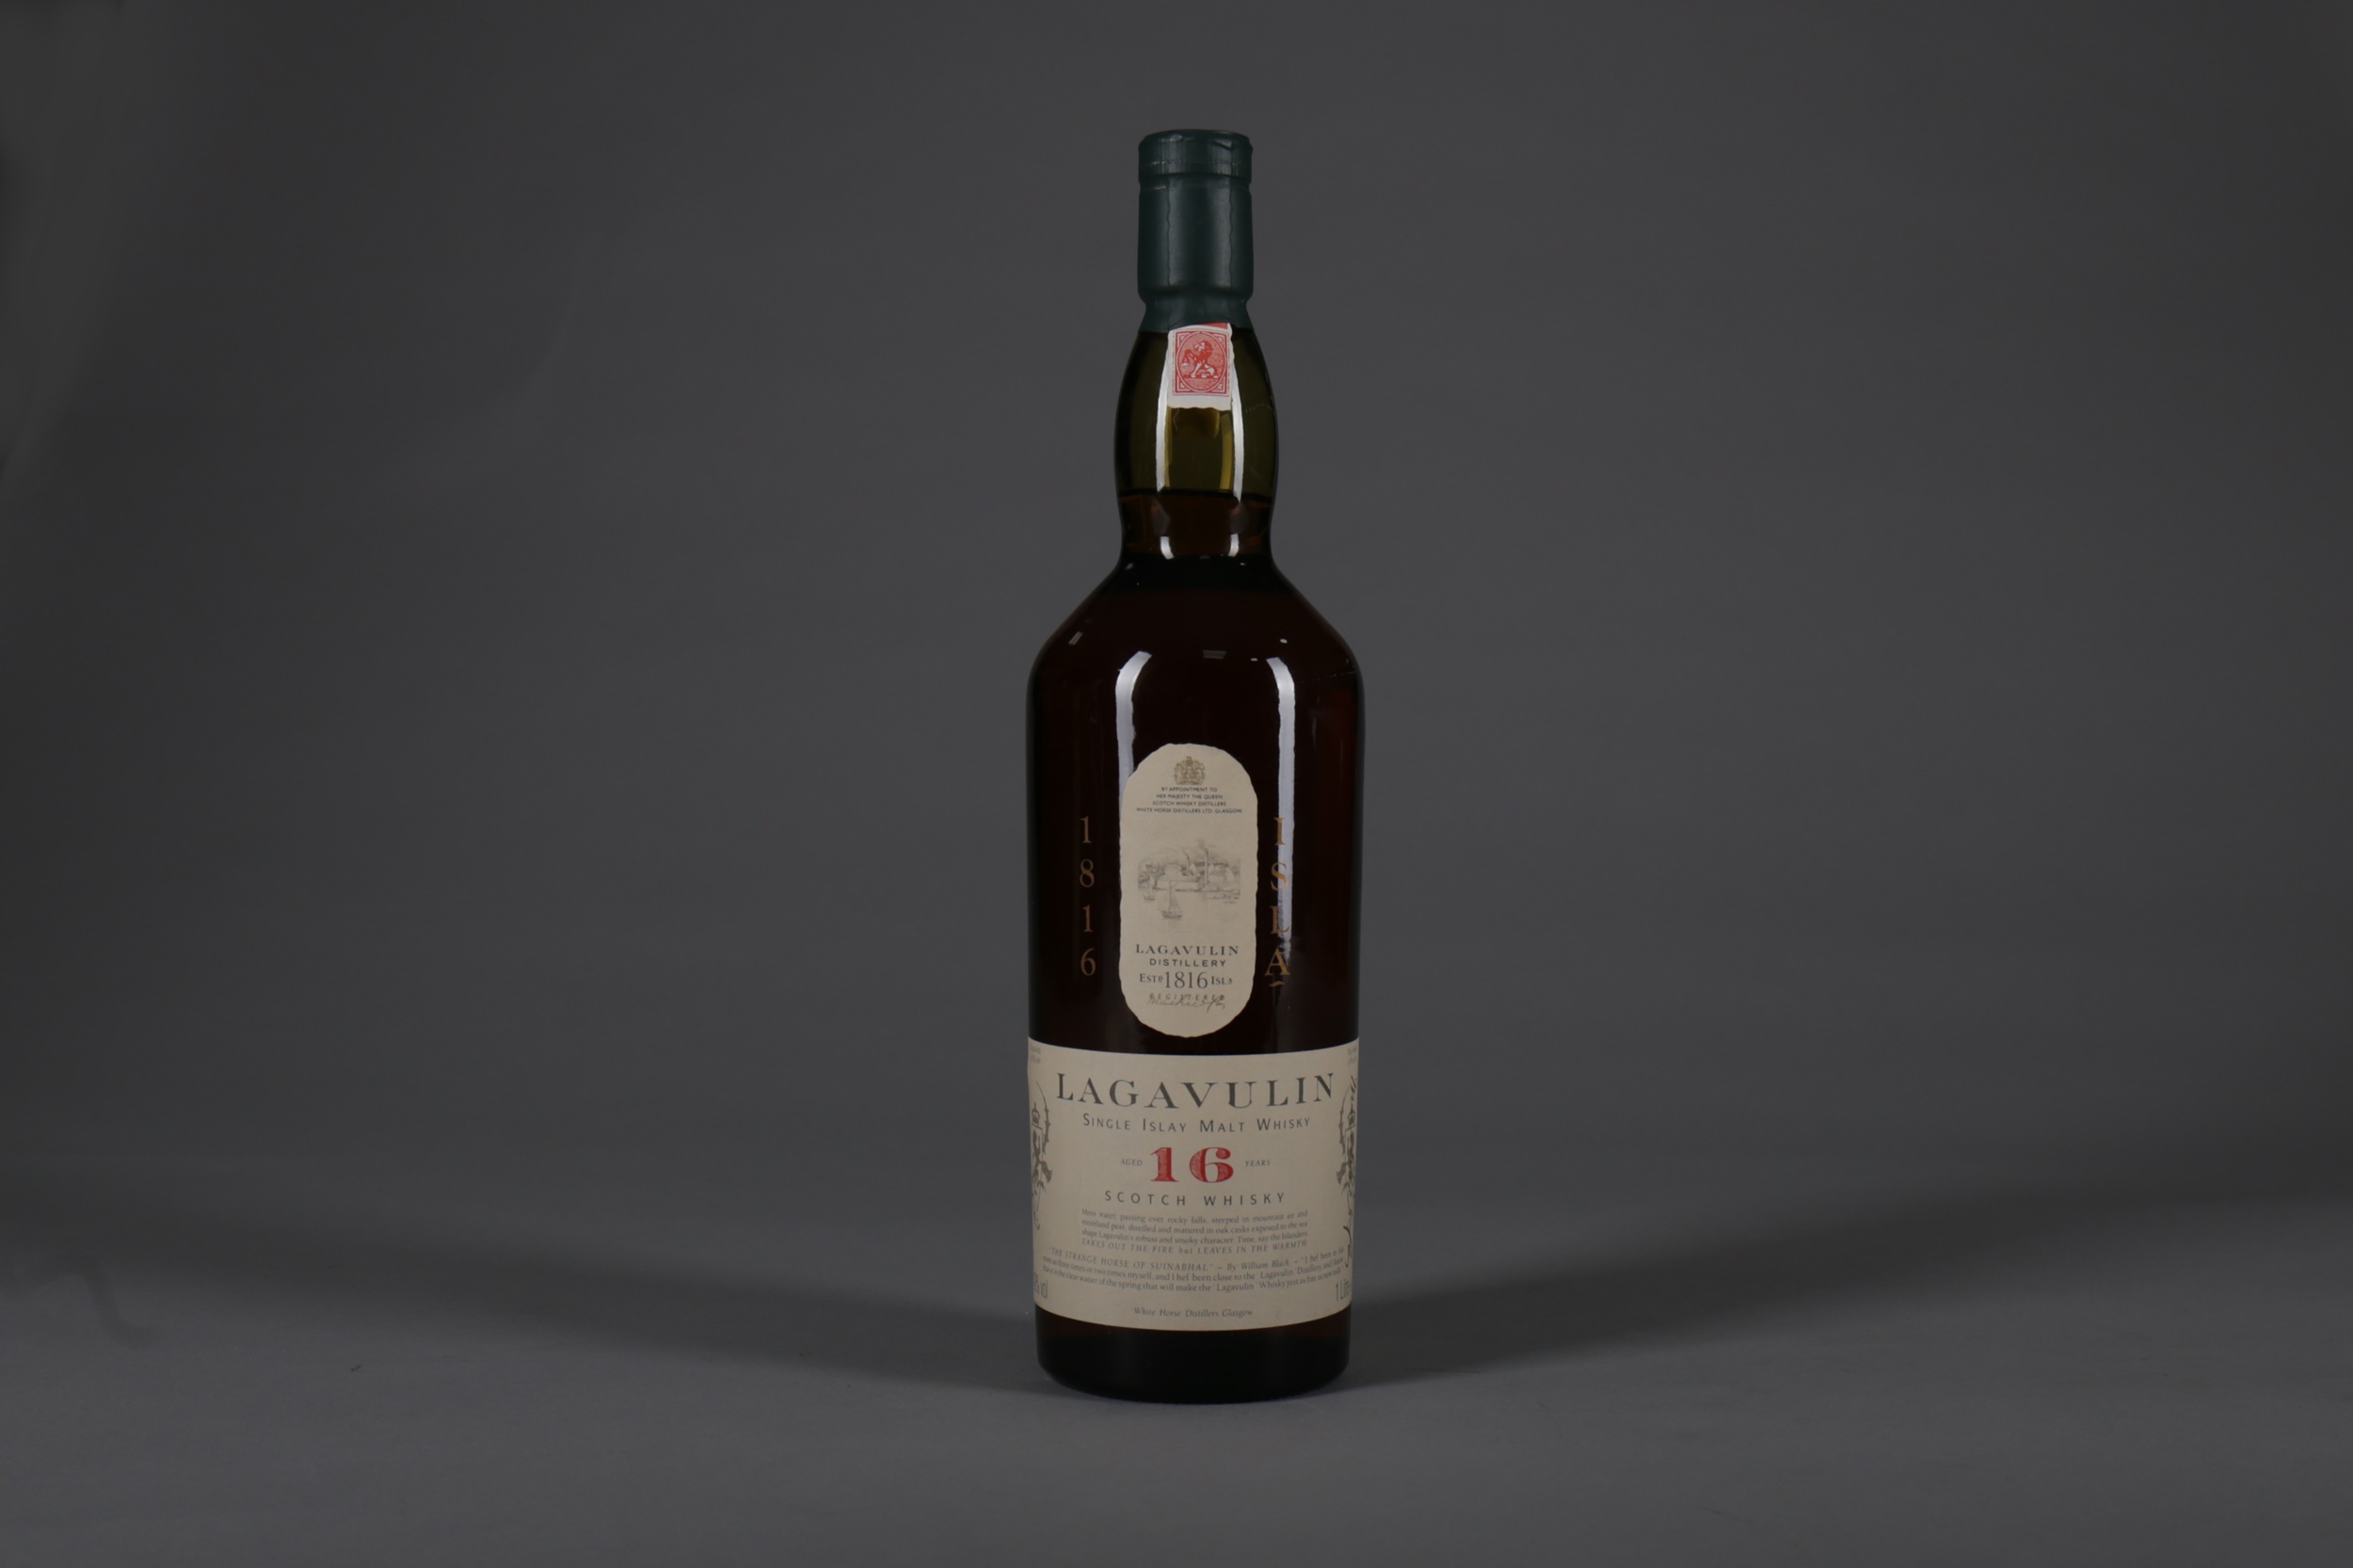 LAGAVULIN AGED 16 YEARS WHITE HORSE DISTILLERS - ONE LITRE